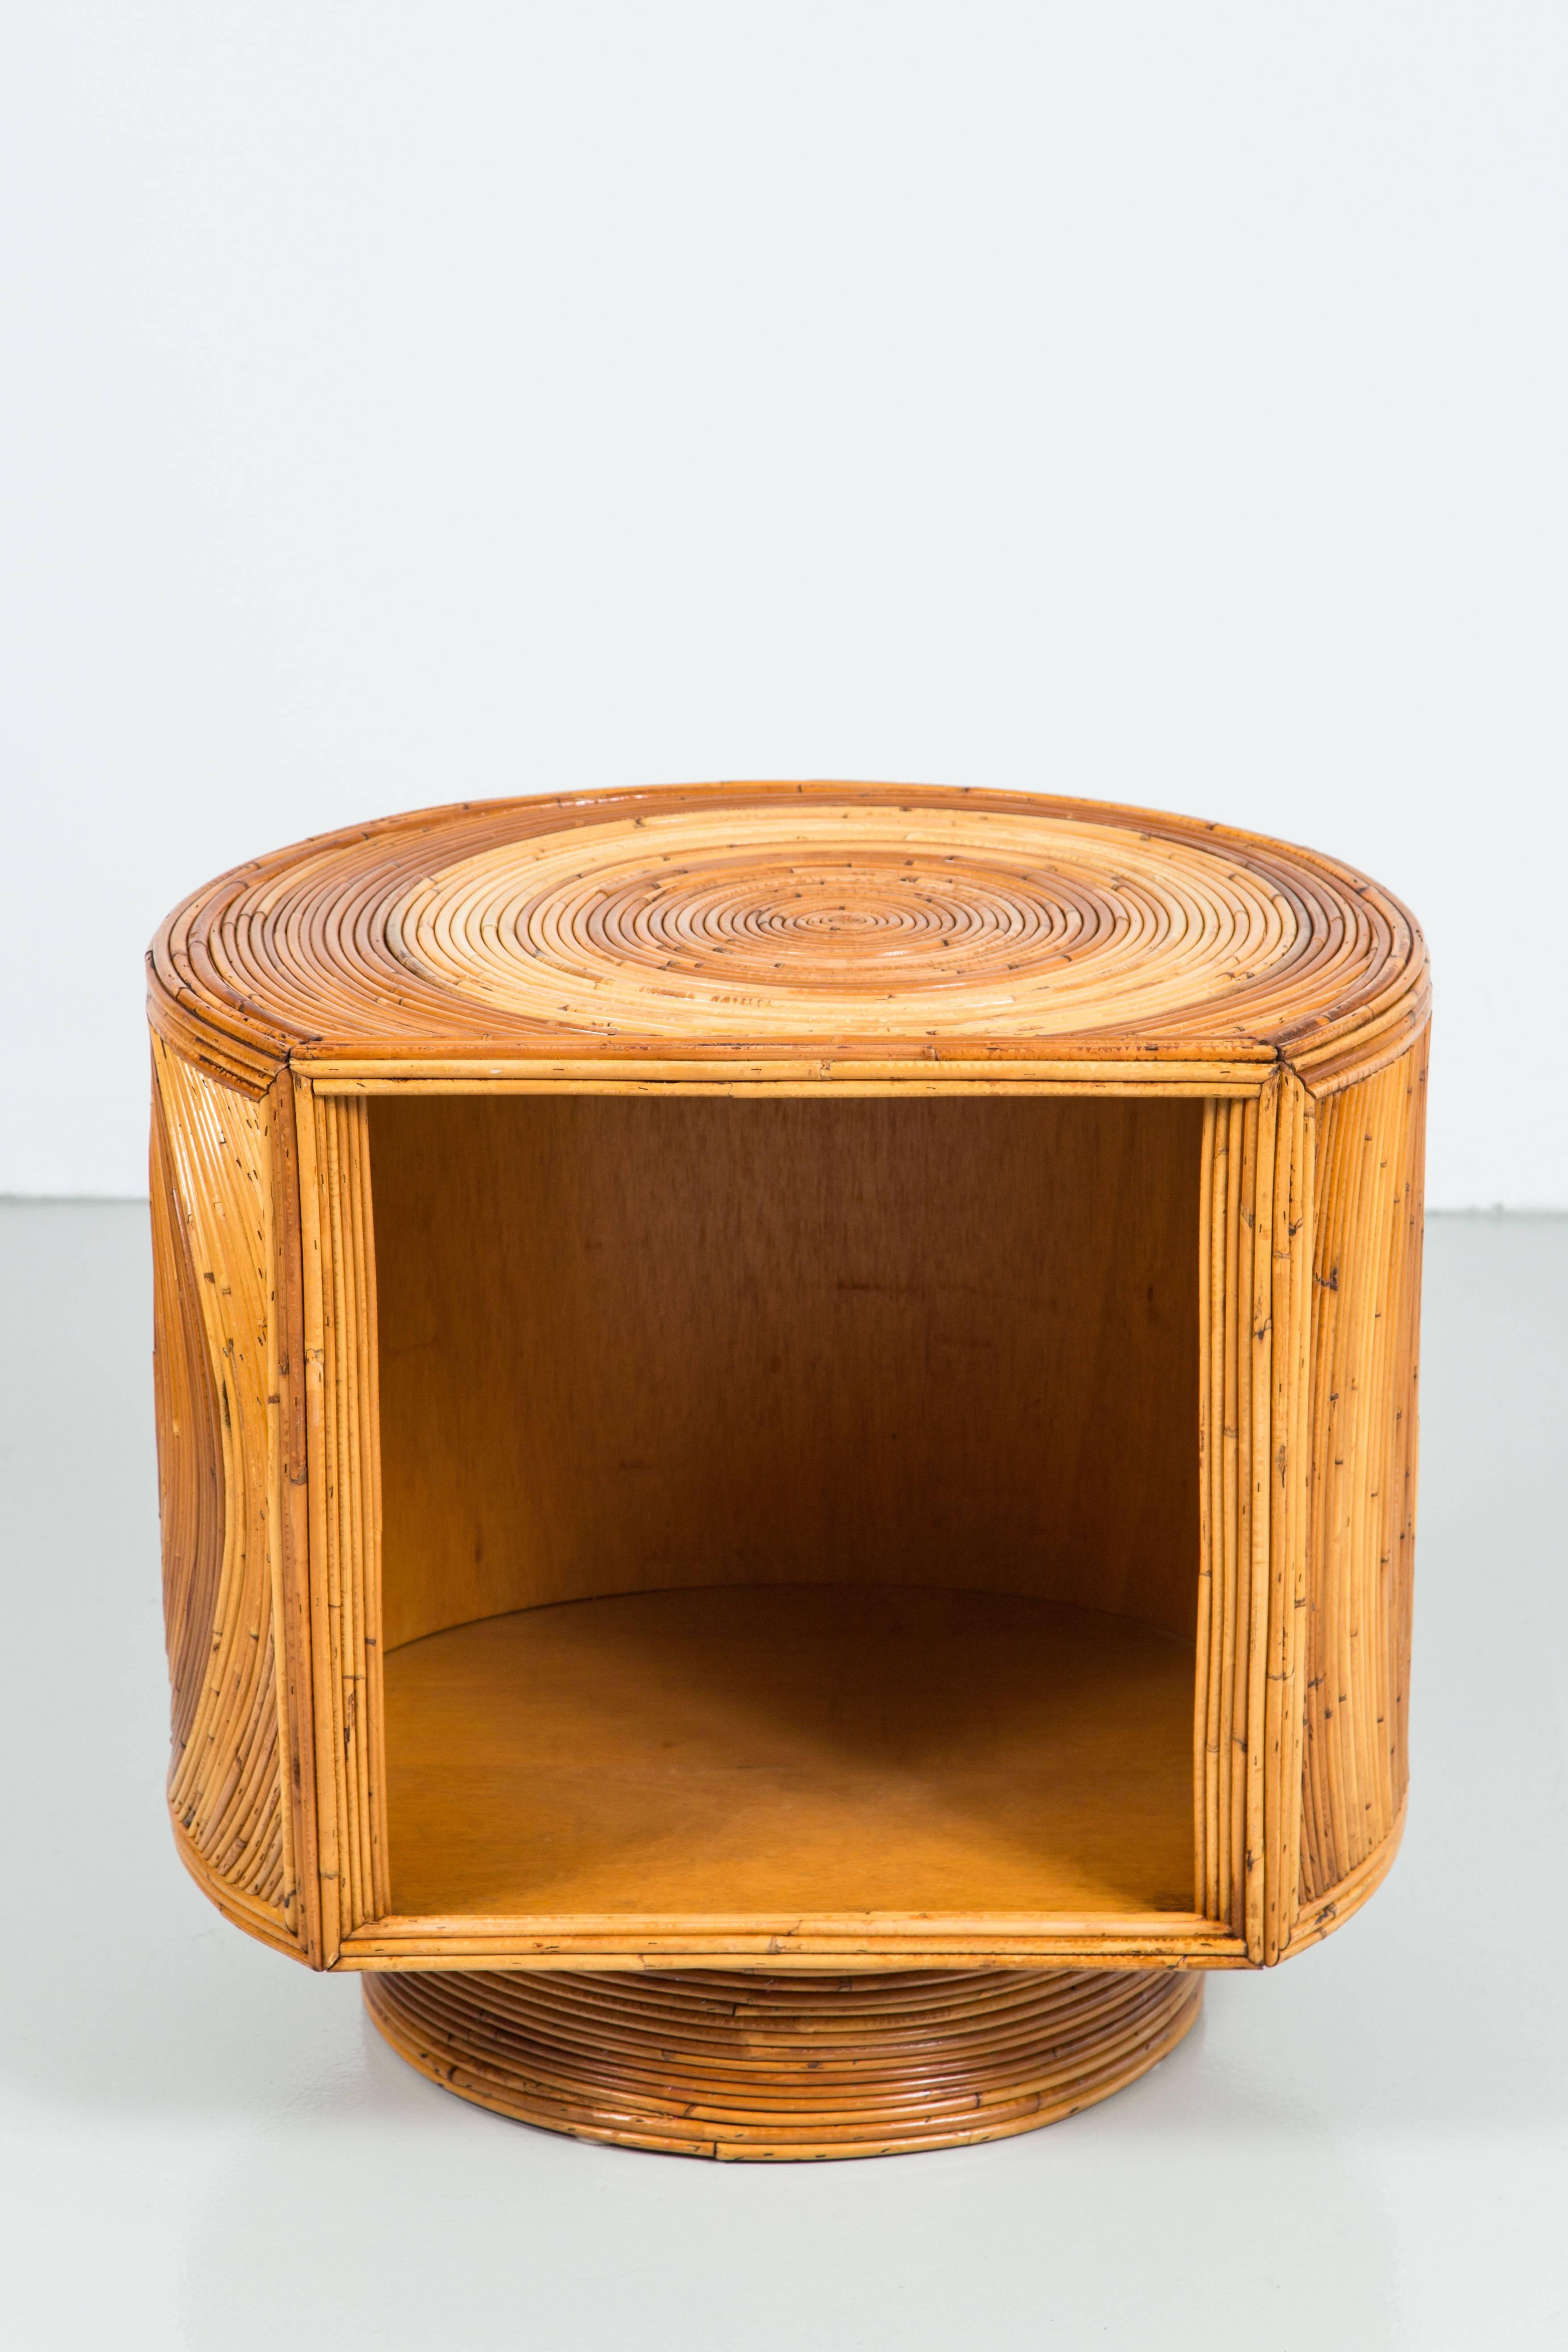 Fantastic pair of Gabriella Crespi style end tables with circular patterned bamboo top and sides. Very well made and functional design with swivel bases and open storage.